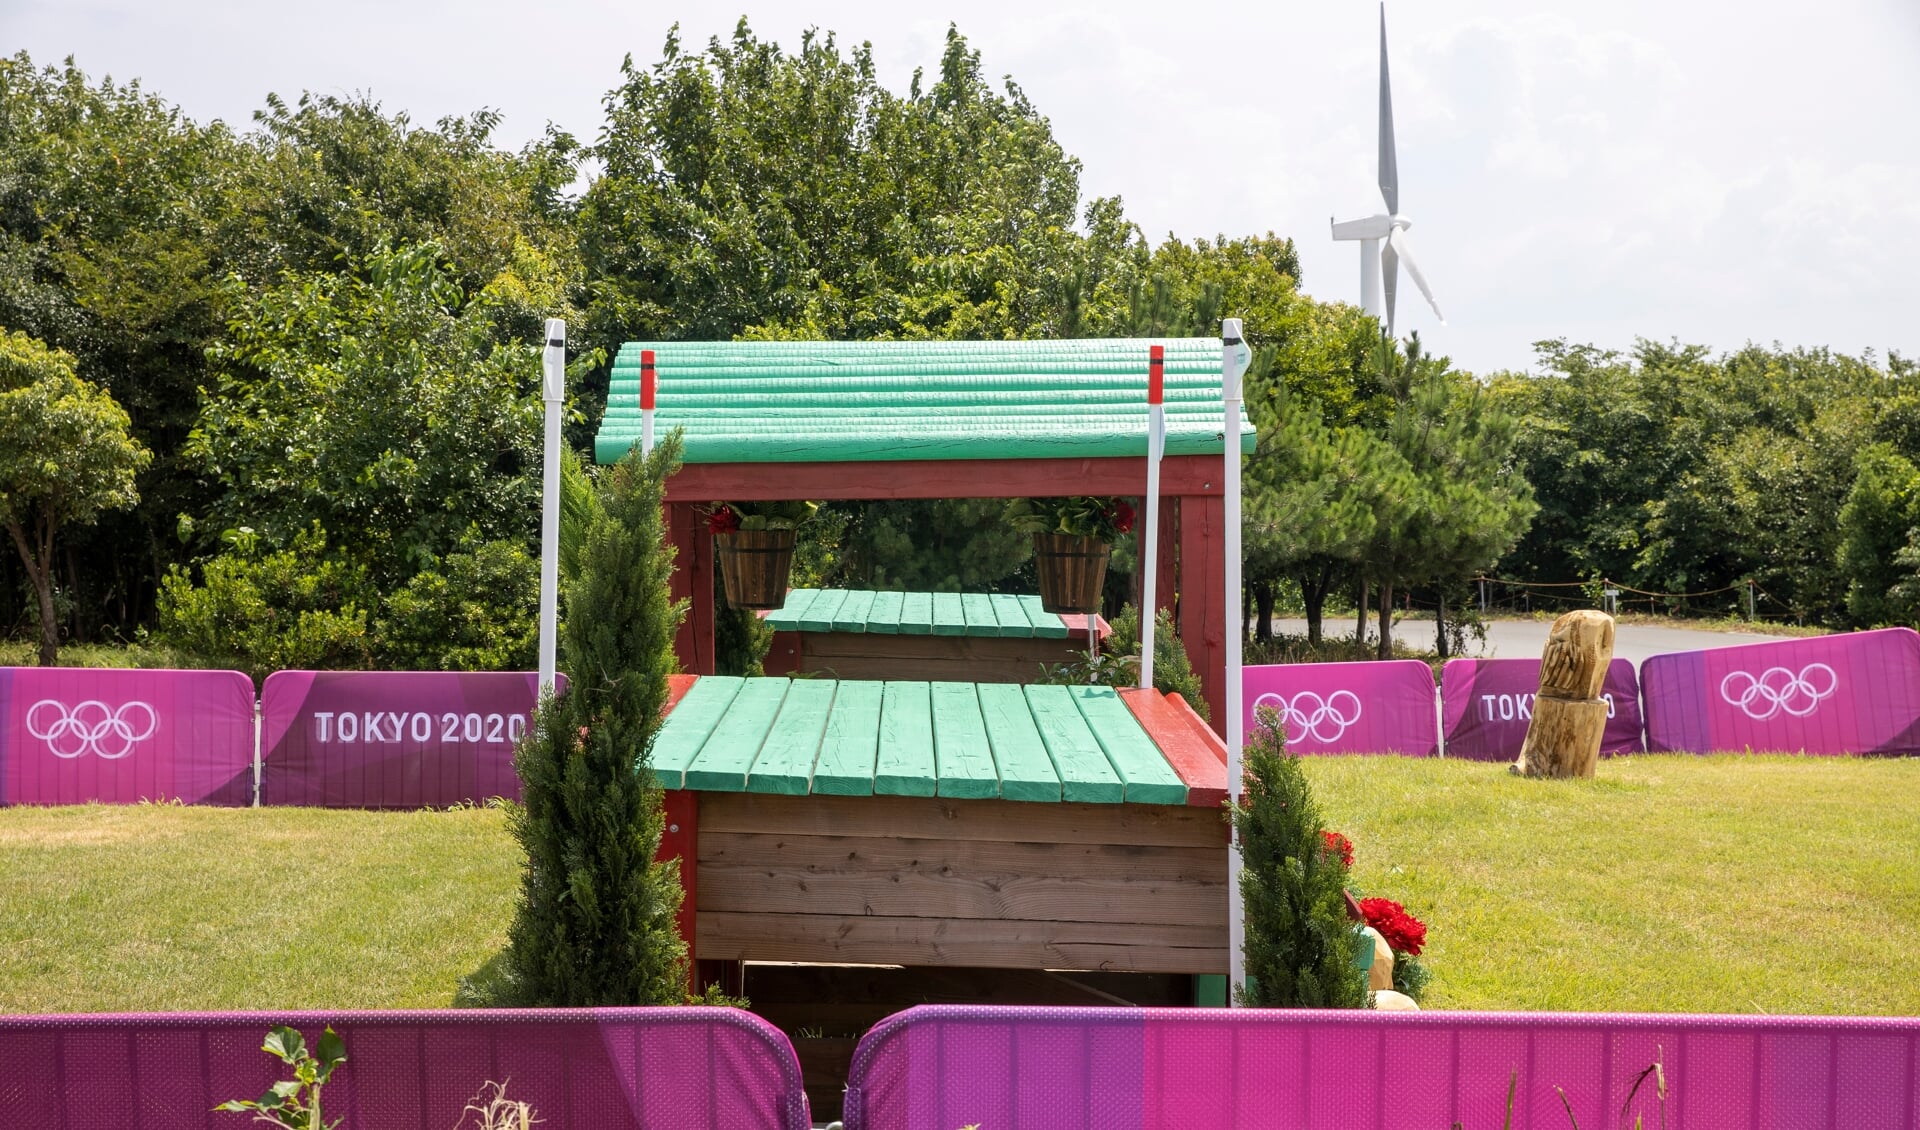 Fence 2
Olympic Games Tokyo 2021
© Hippo Foto - Dirk Caremans
28/07/2021